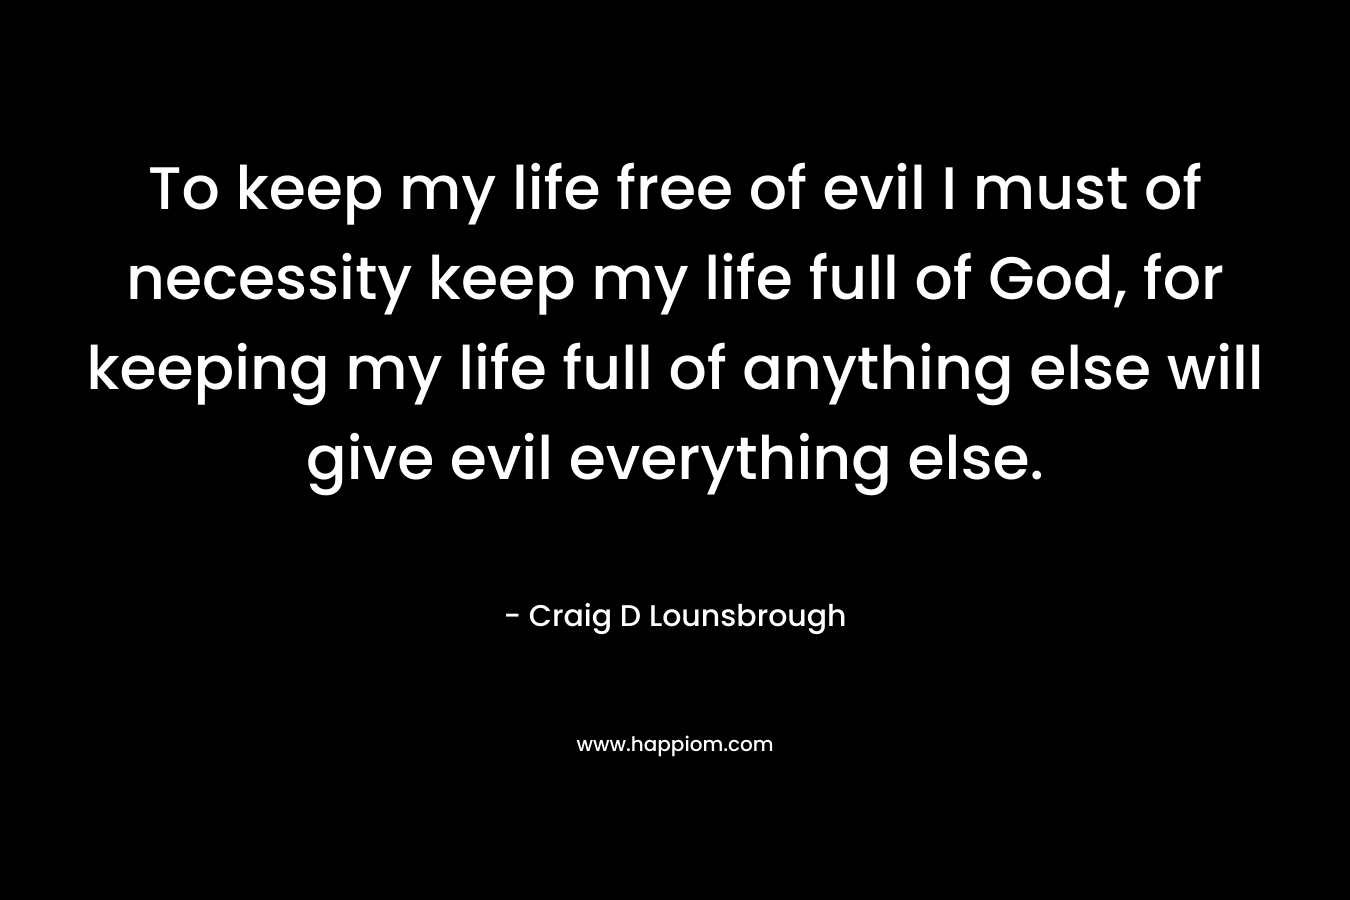 To keep my life free of evil I must of necessity keep my life full of God, for keeping my life full of anything else will give evil everything else.